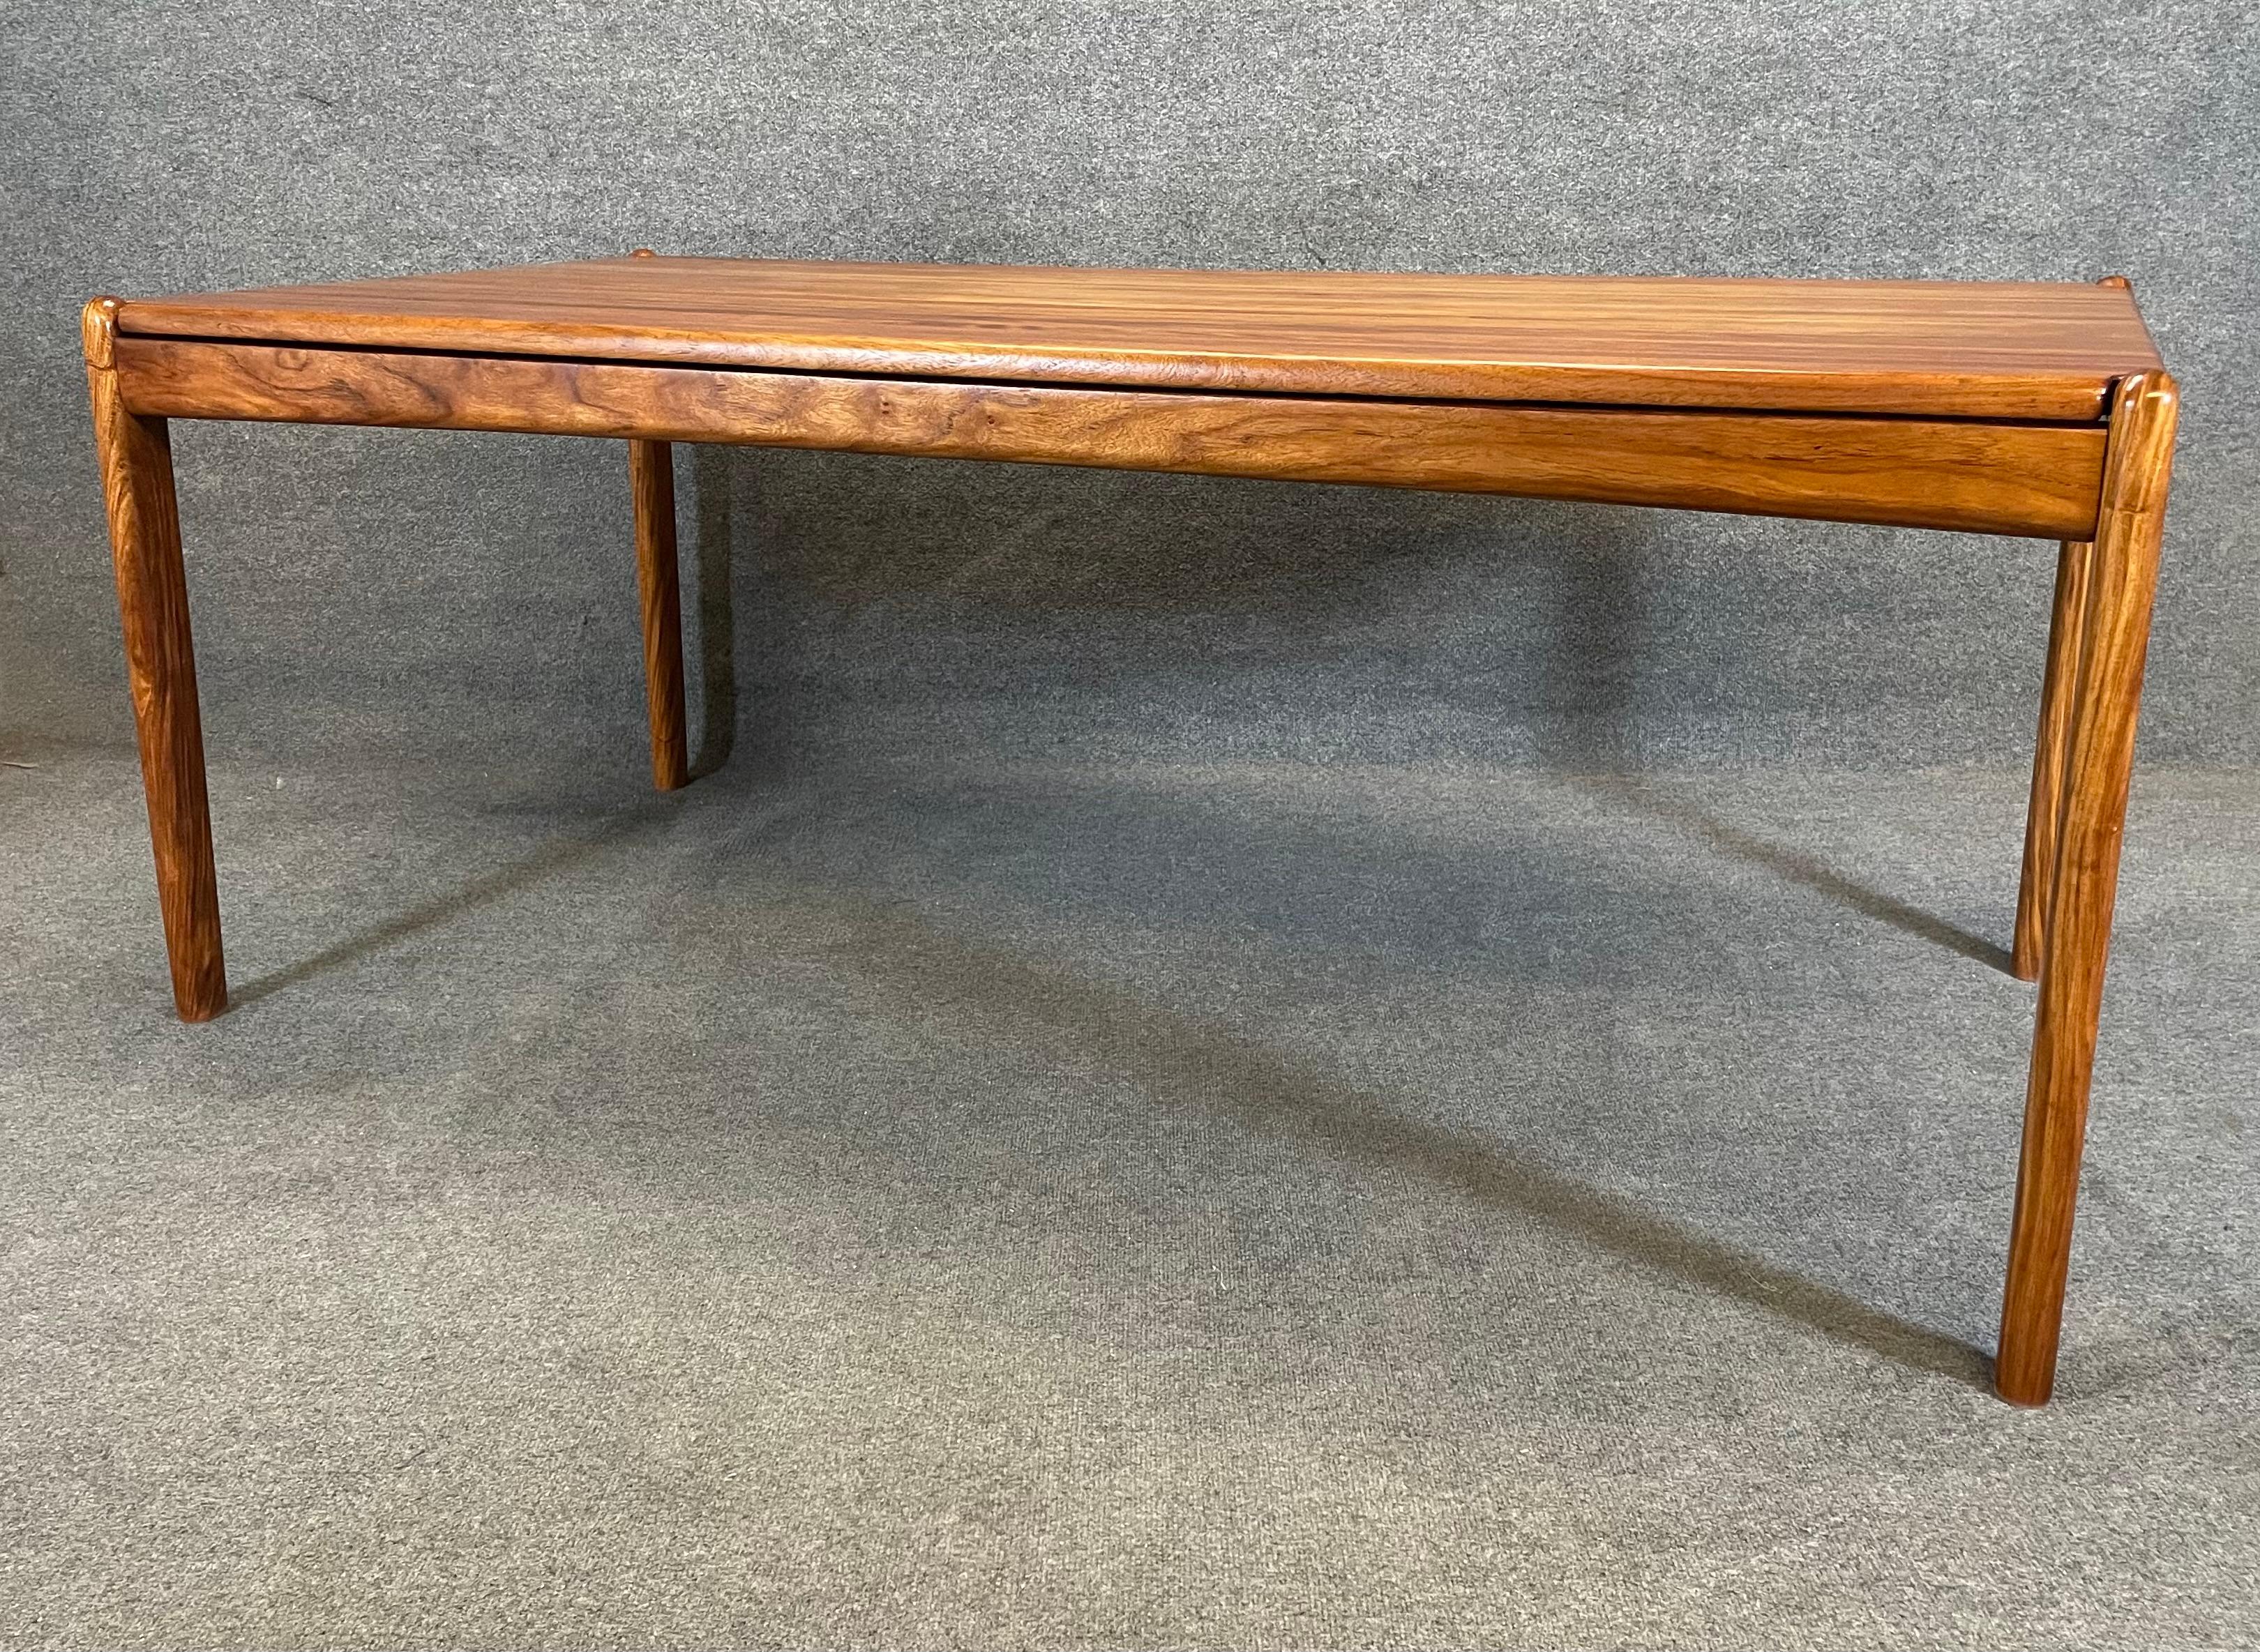 Vintage Danish Mid Century Modern Solid Mahogany Dining Table In Good Condition For Sale In San Marcos, CA